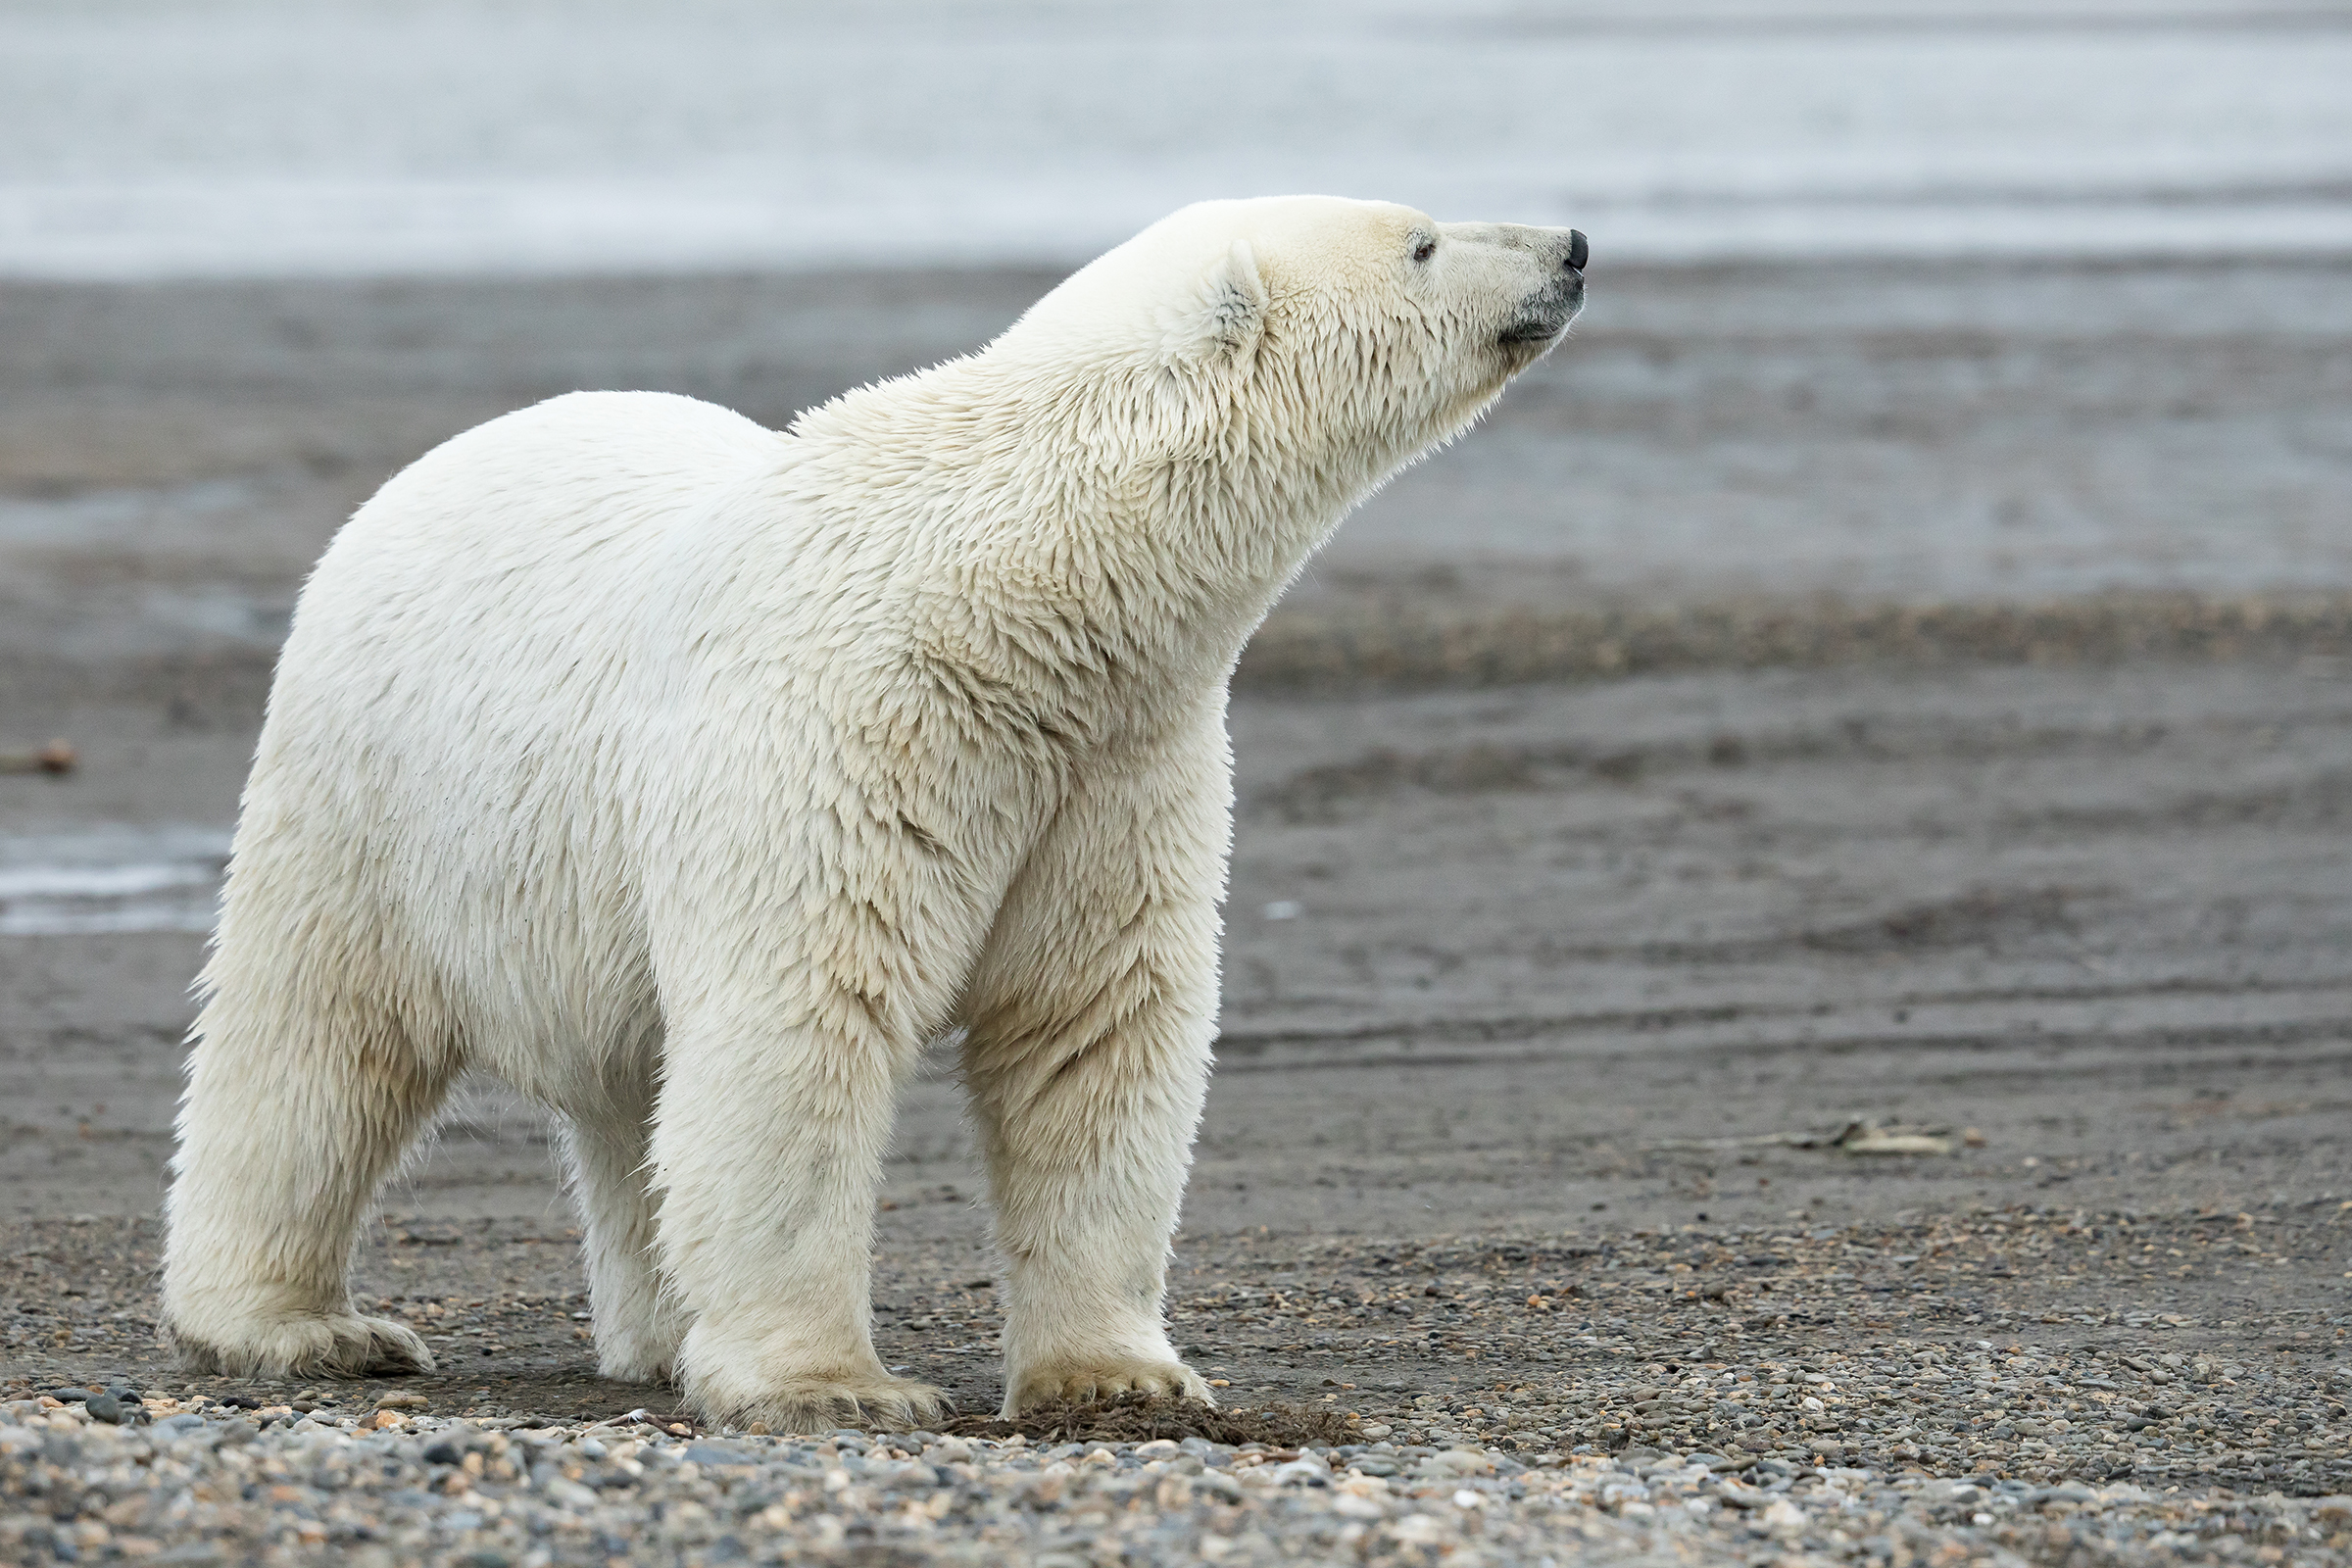 Threatened by melting sea ice, polar bears' status up for review under  Endangered Species Act